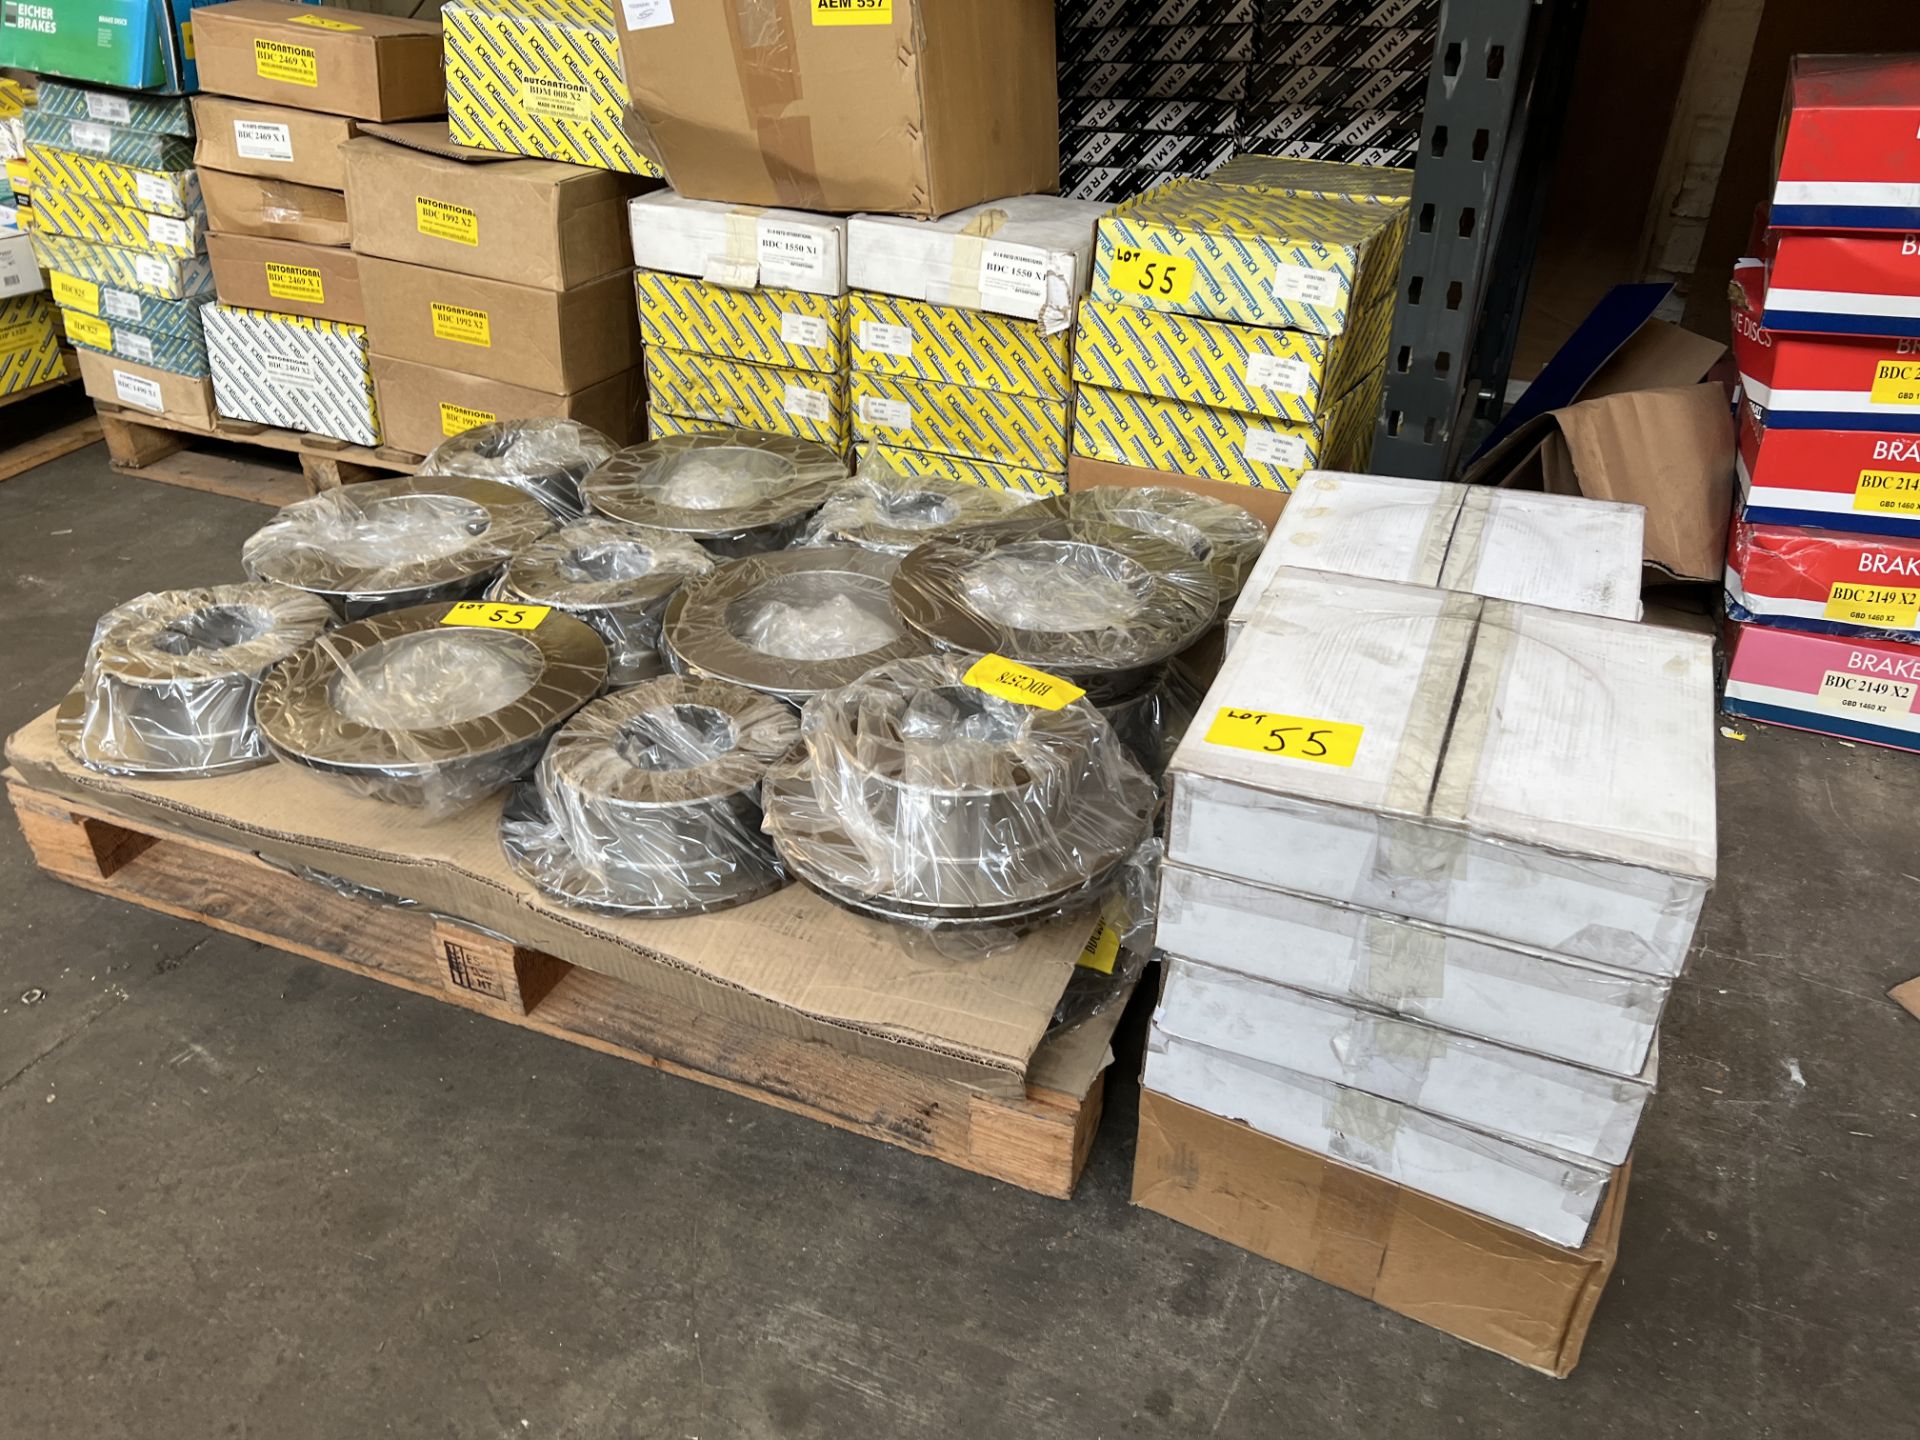 Large Quantity of Land Rover and Range Rover Components including Brake Disks, Drums, Pads, - Image 2 of 32